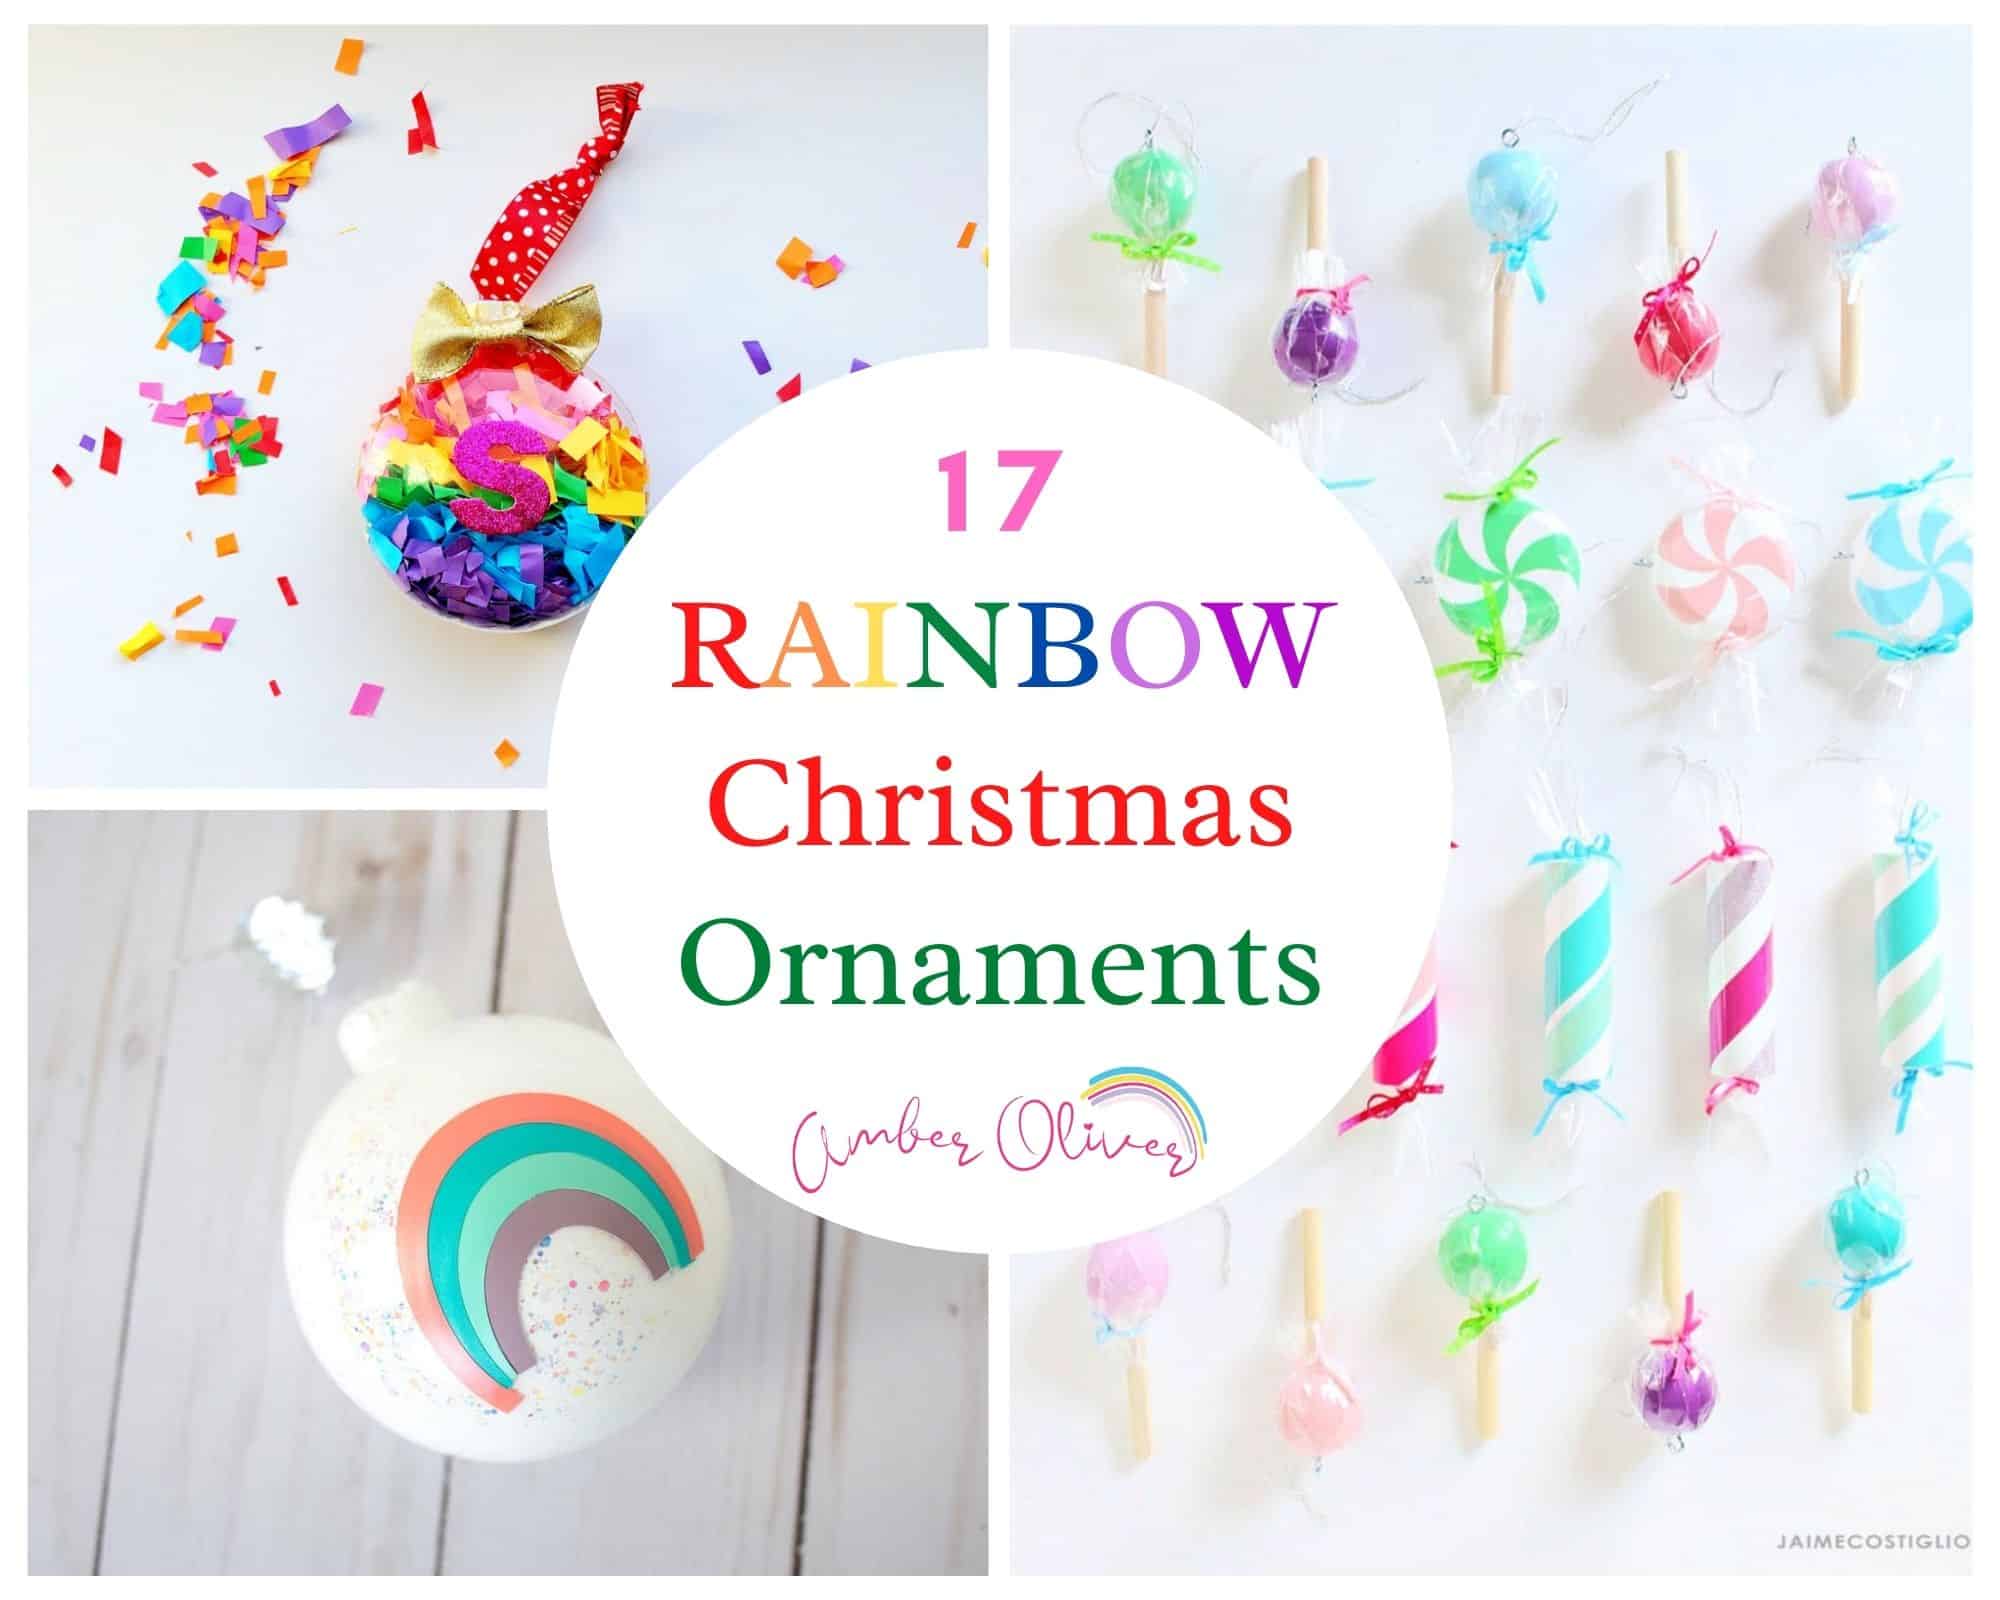 rainbow ornaments feature collage